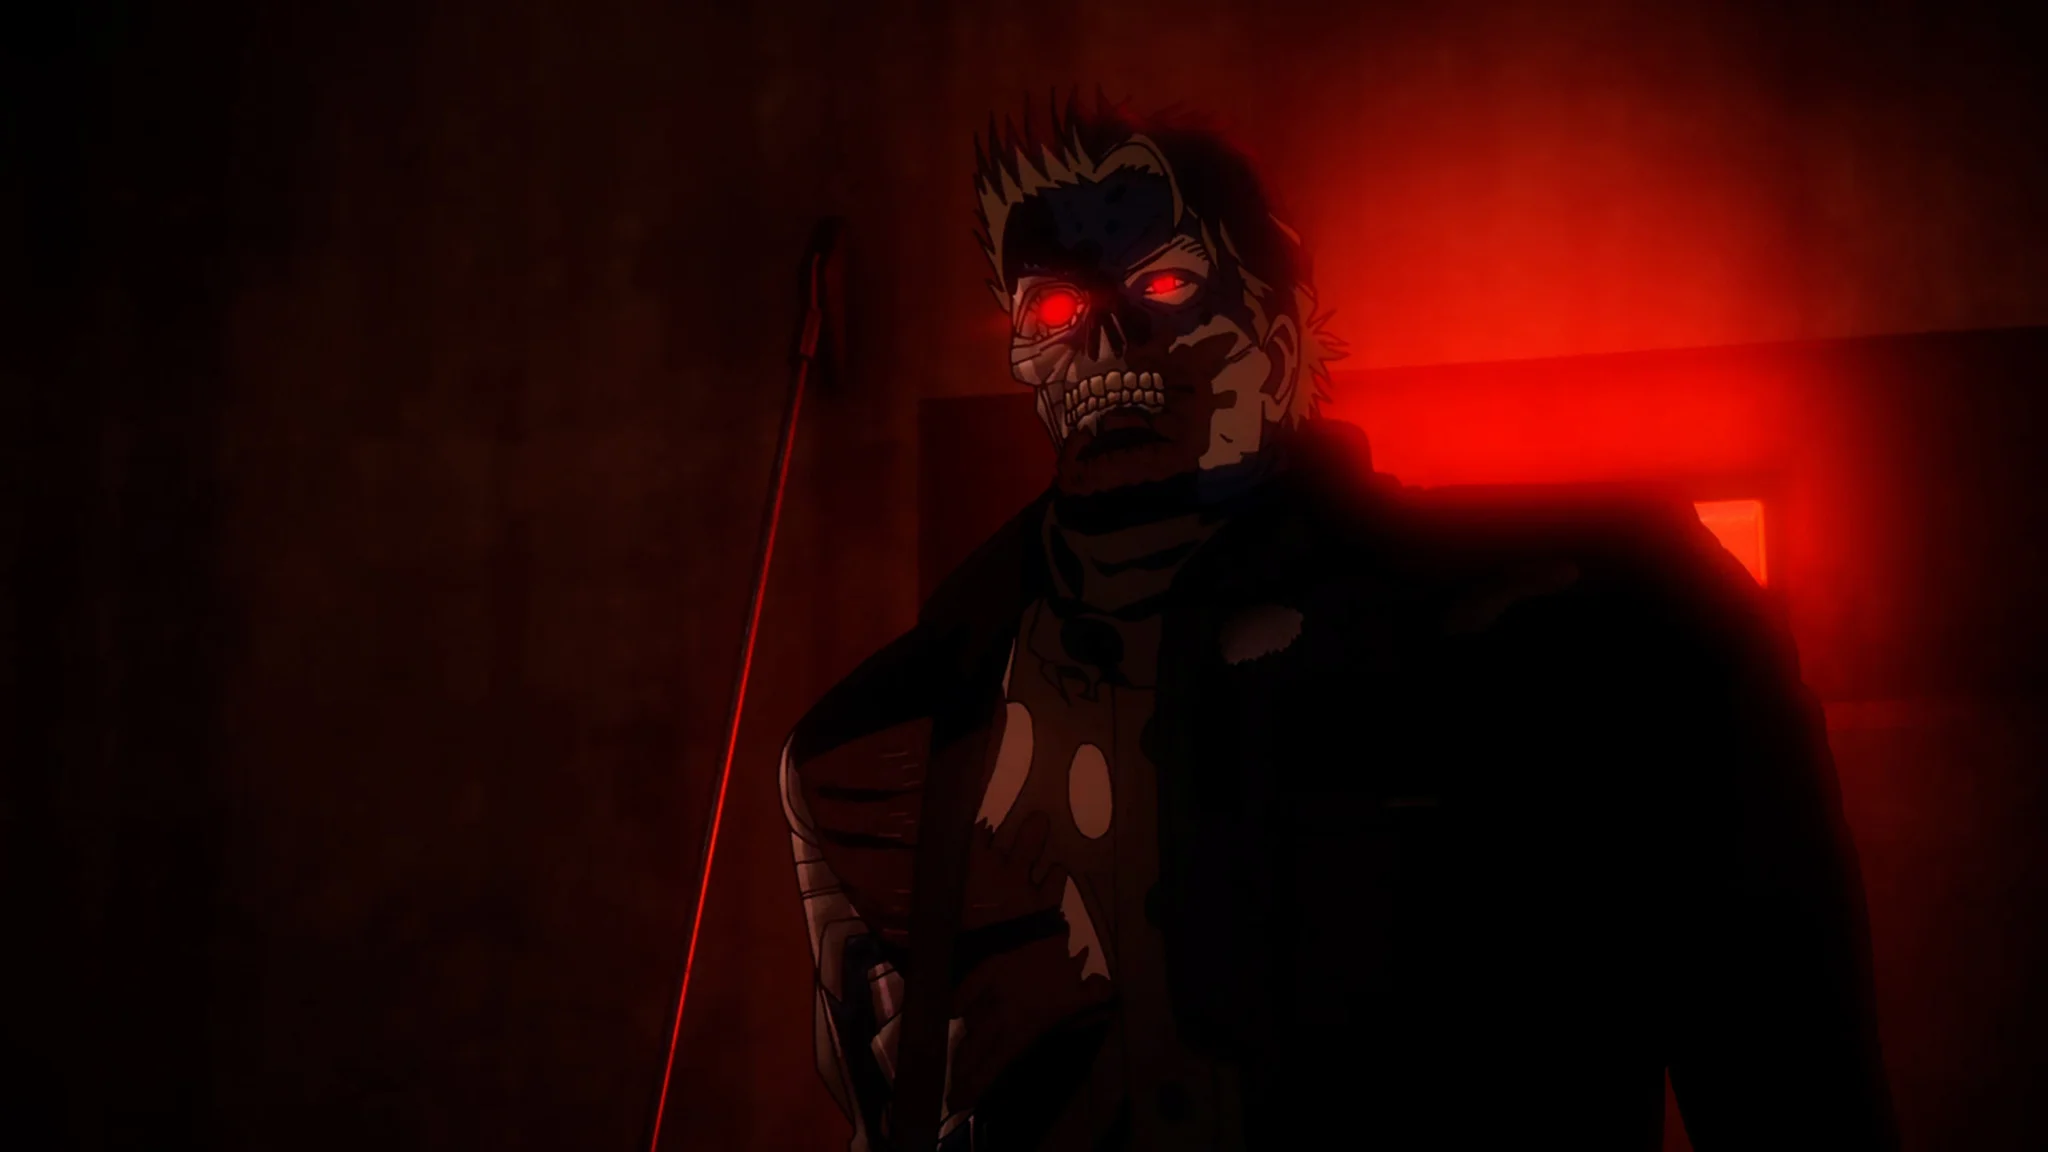 The streaming service Netflix has released the first teaser trailer for an anime based on the Terminator universe.